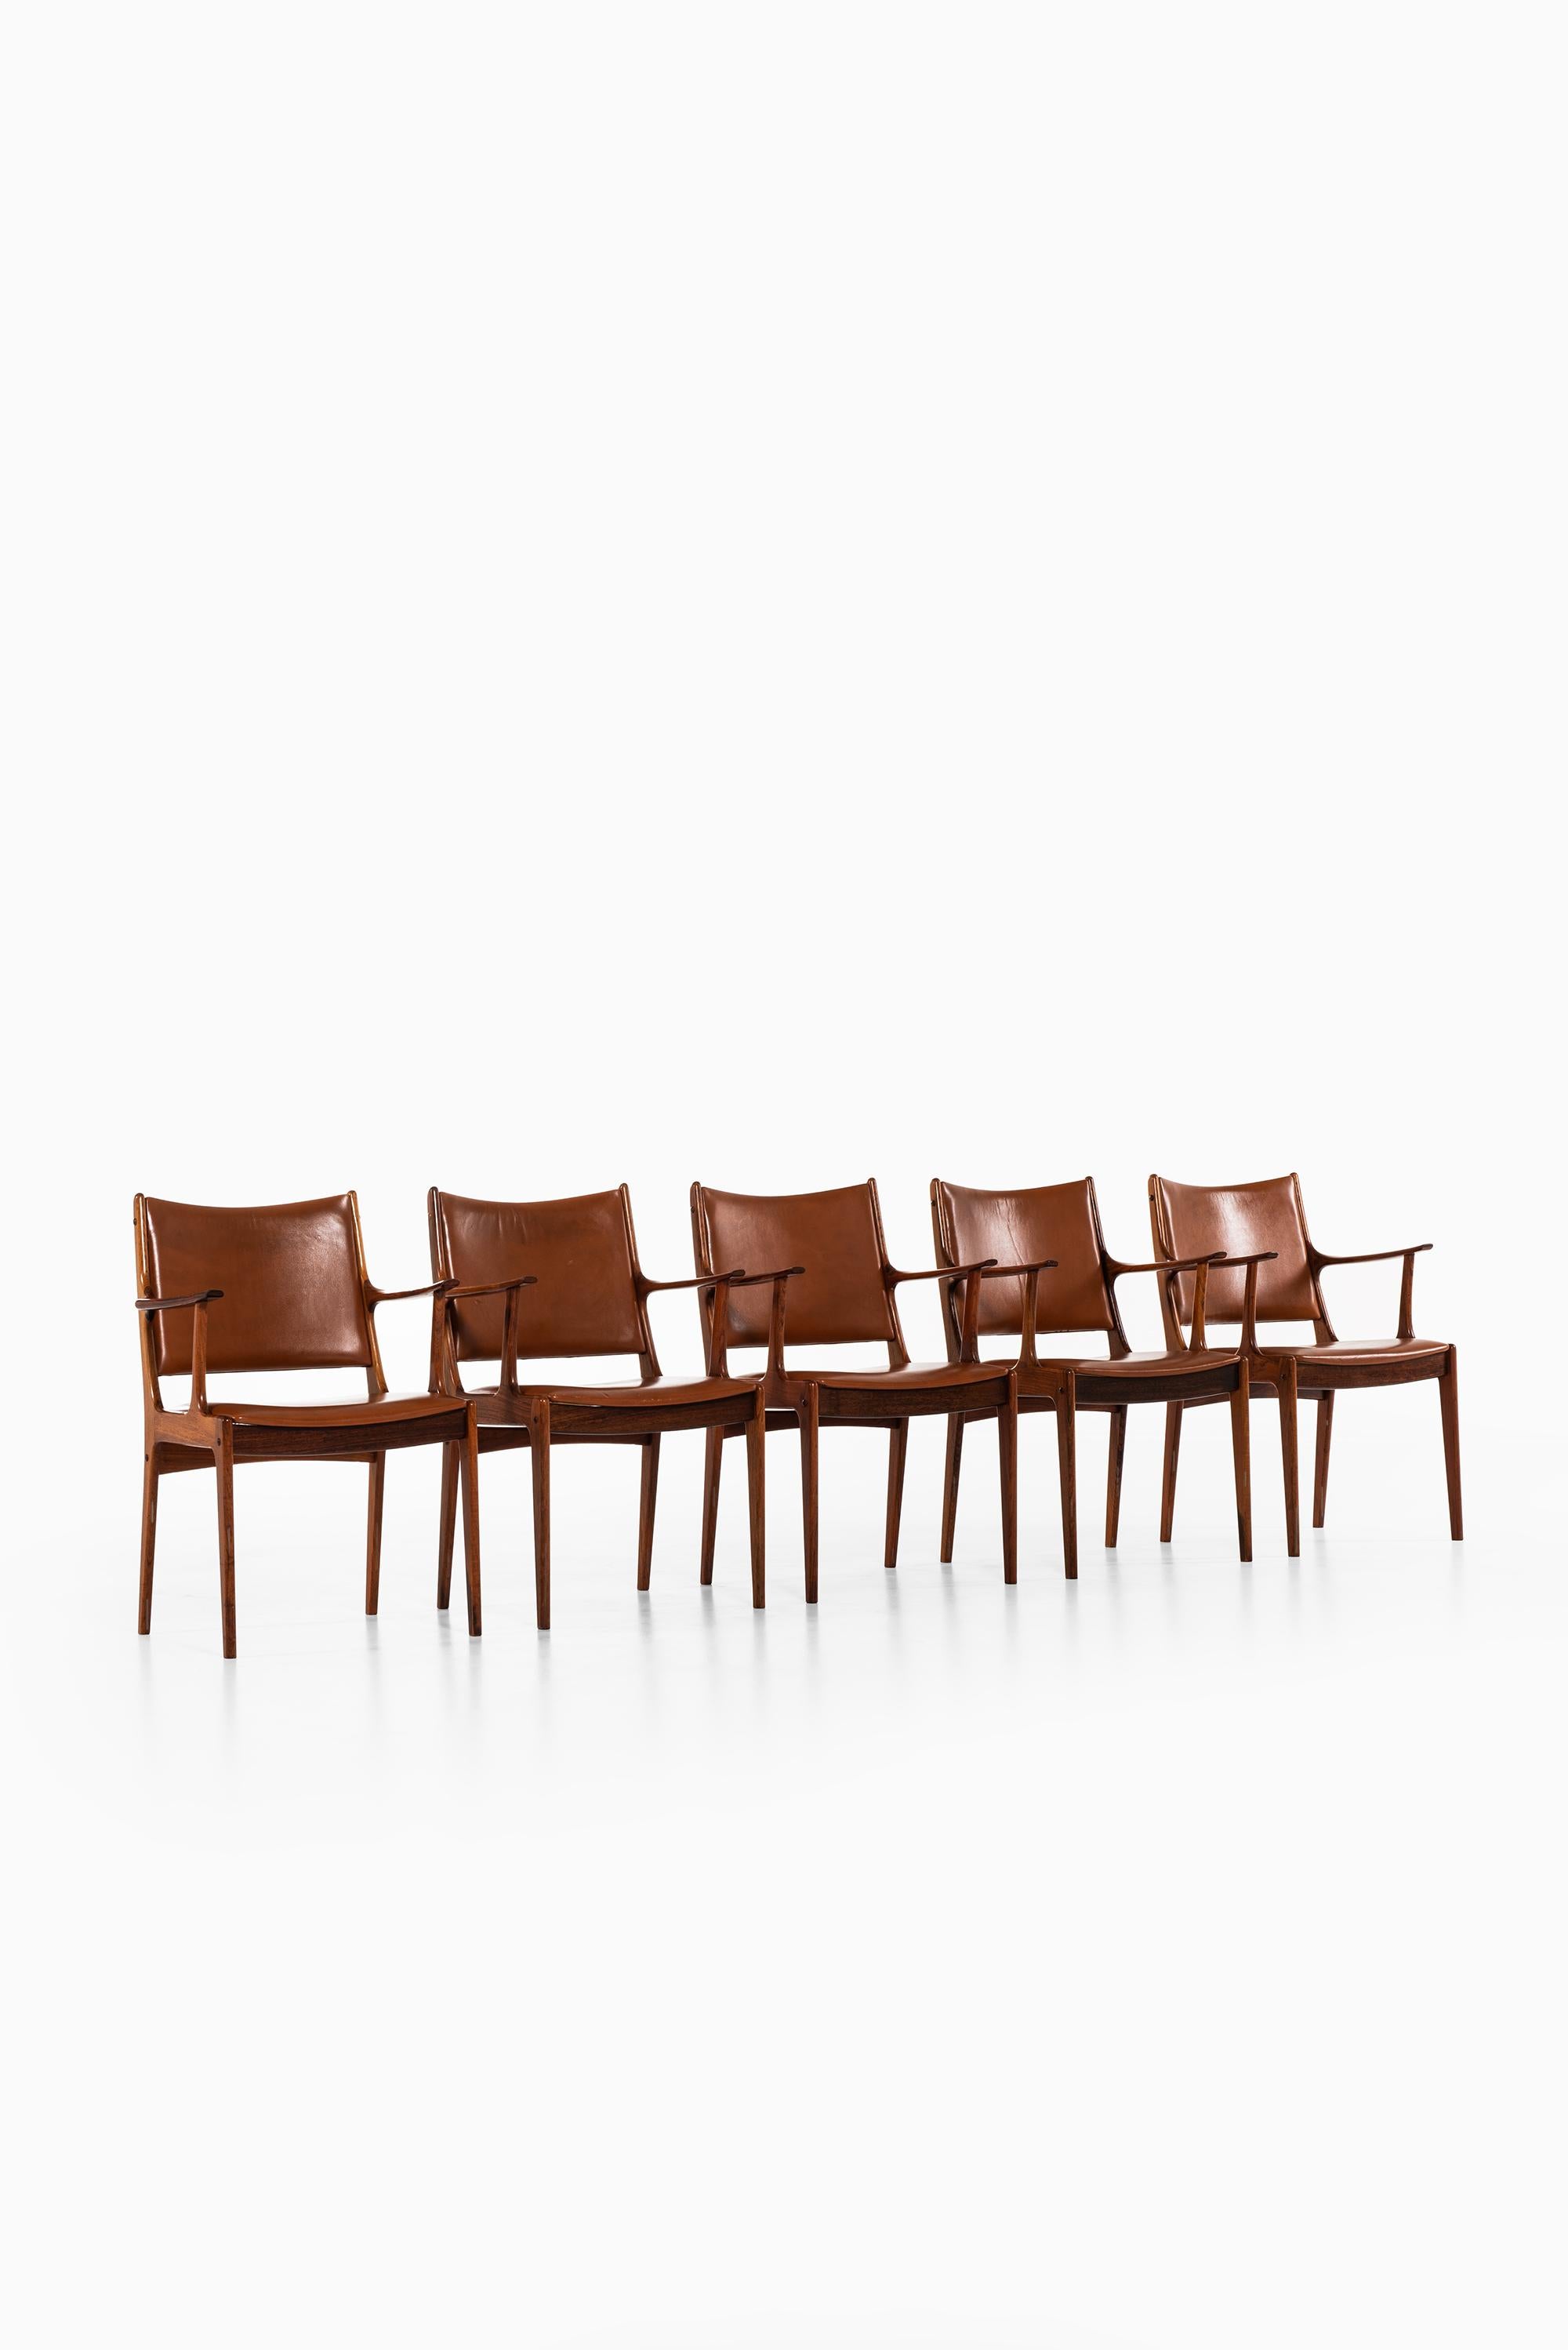 Set of 10 dining chairs / armchairs designed by Johannes Andersen. Produced by Uldum Møbelfabrik in Denmark.